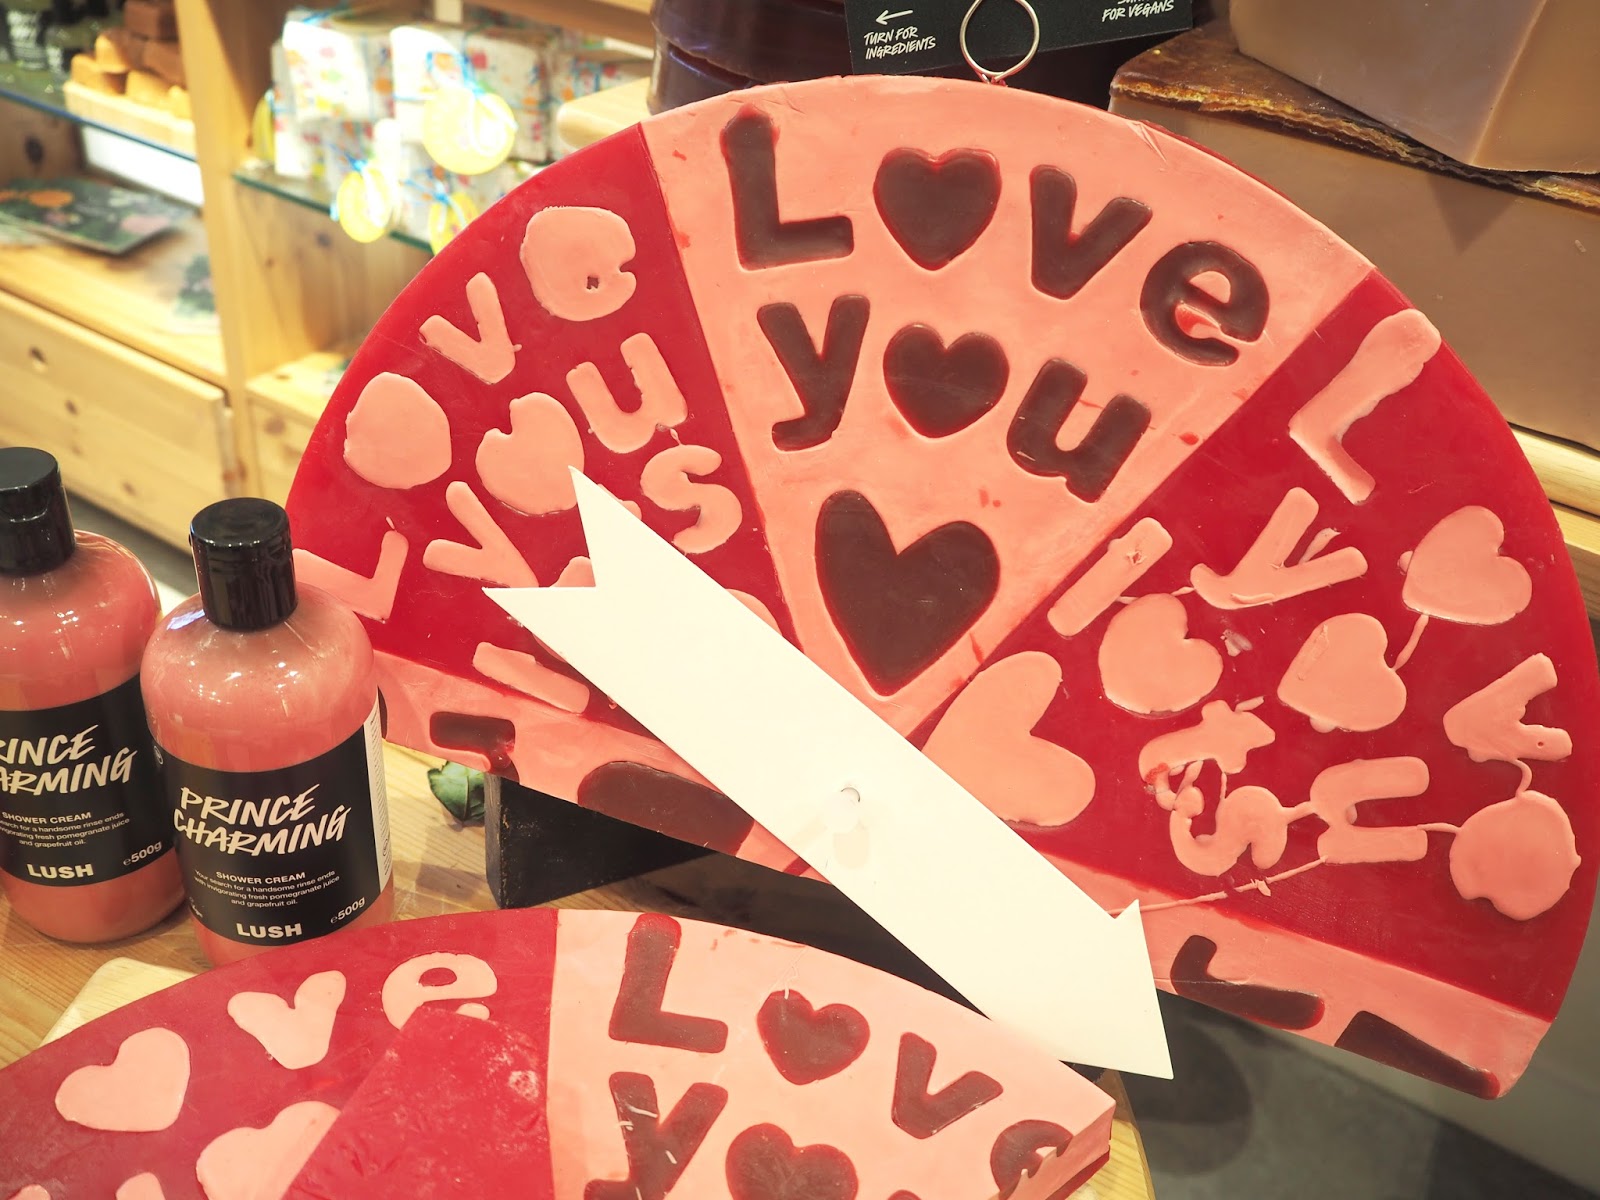 Lush Cosmetics Valentines 2017 Collection, Katie Kirk Loves, Lush Cosmetics UK, Lush 2017, Beauty Blogger, UK Blogger, Gifts For Her, Valentine's Day Gifts, Gift Ideas, Lush Review, Lush Gifts, Bath & Body Products, Blogger Review